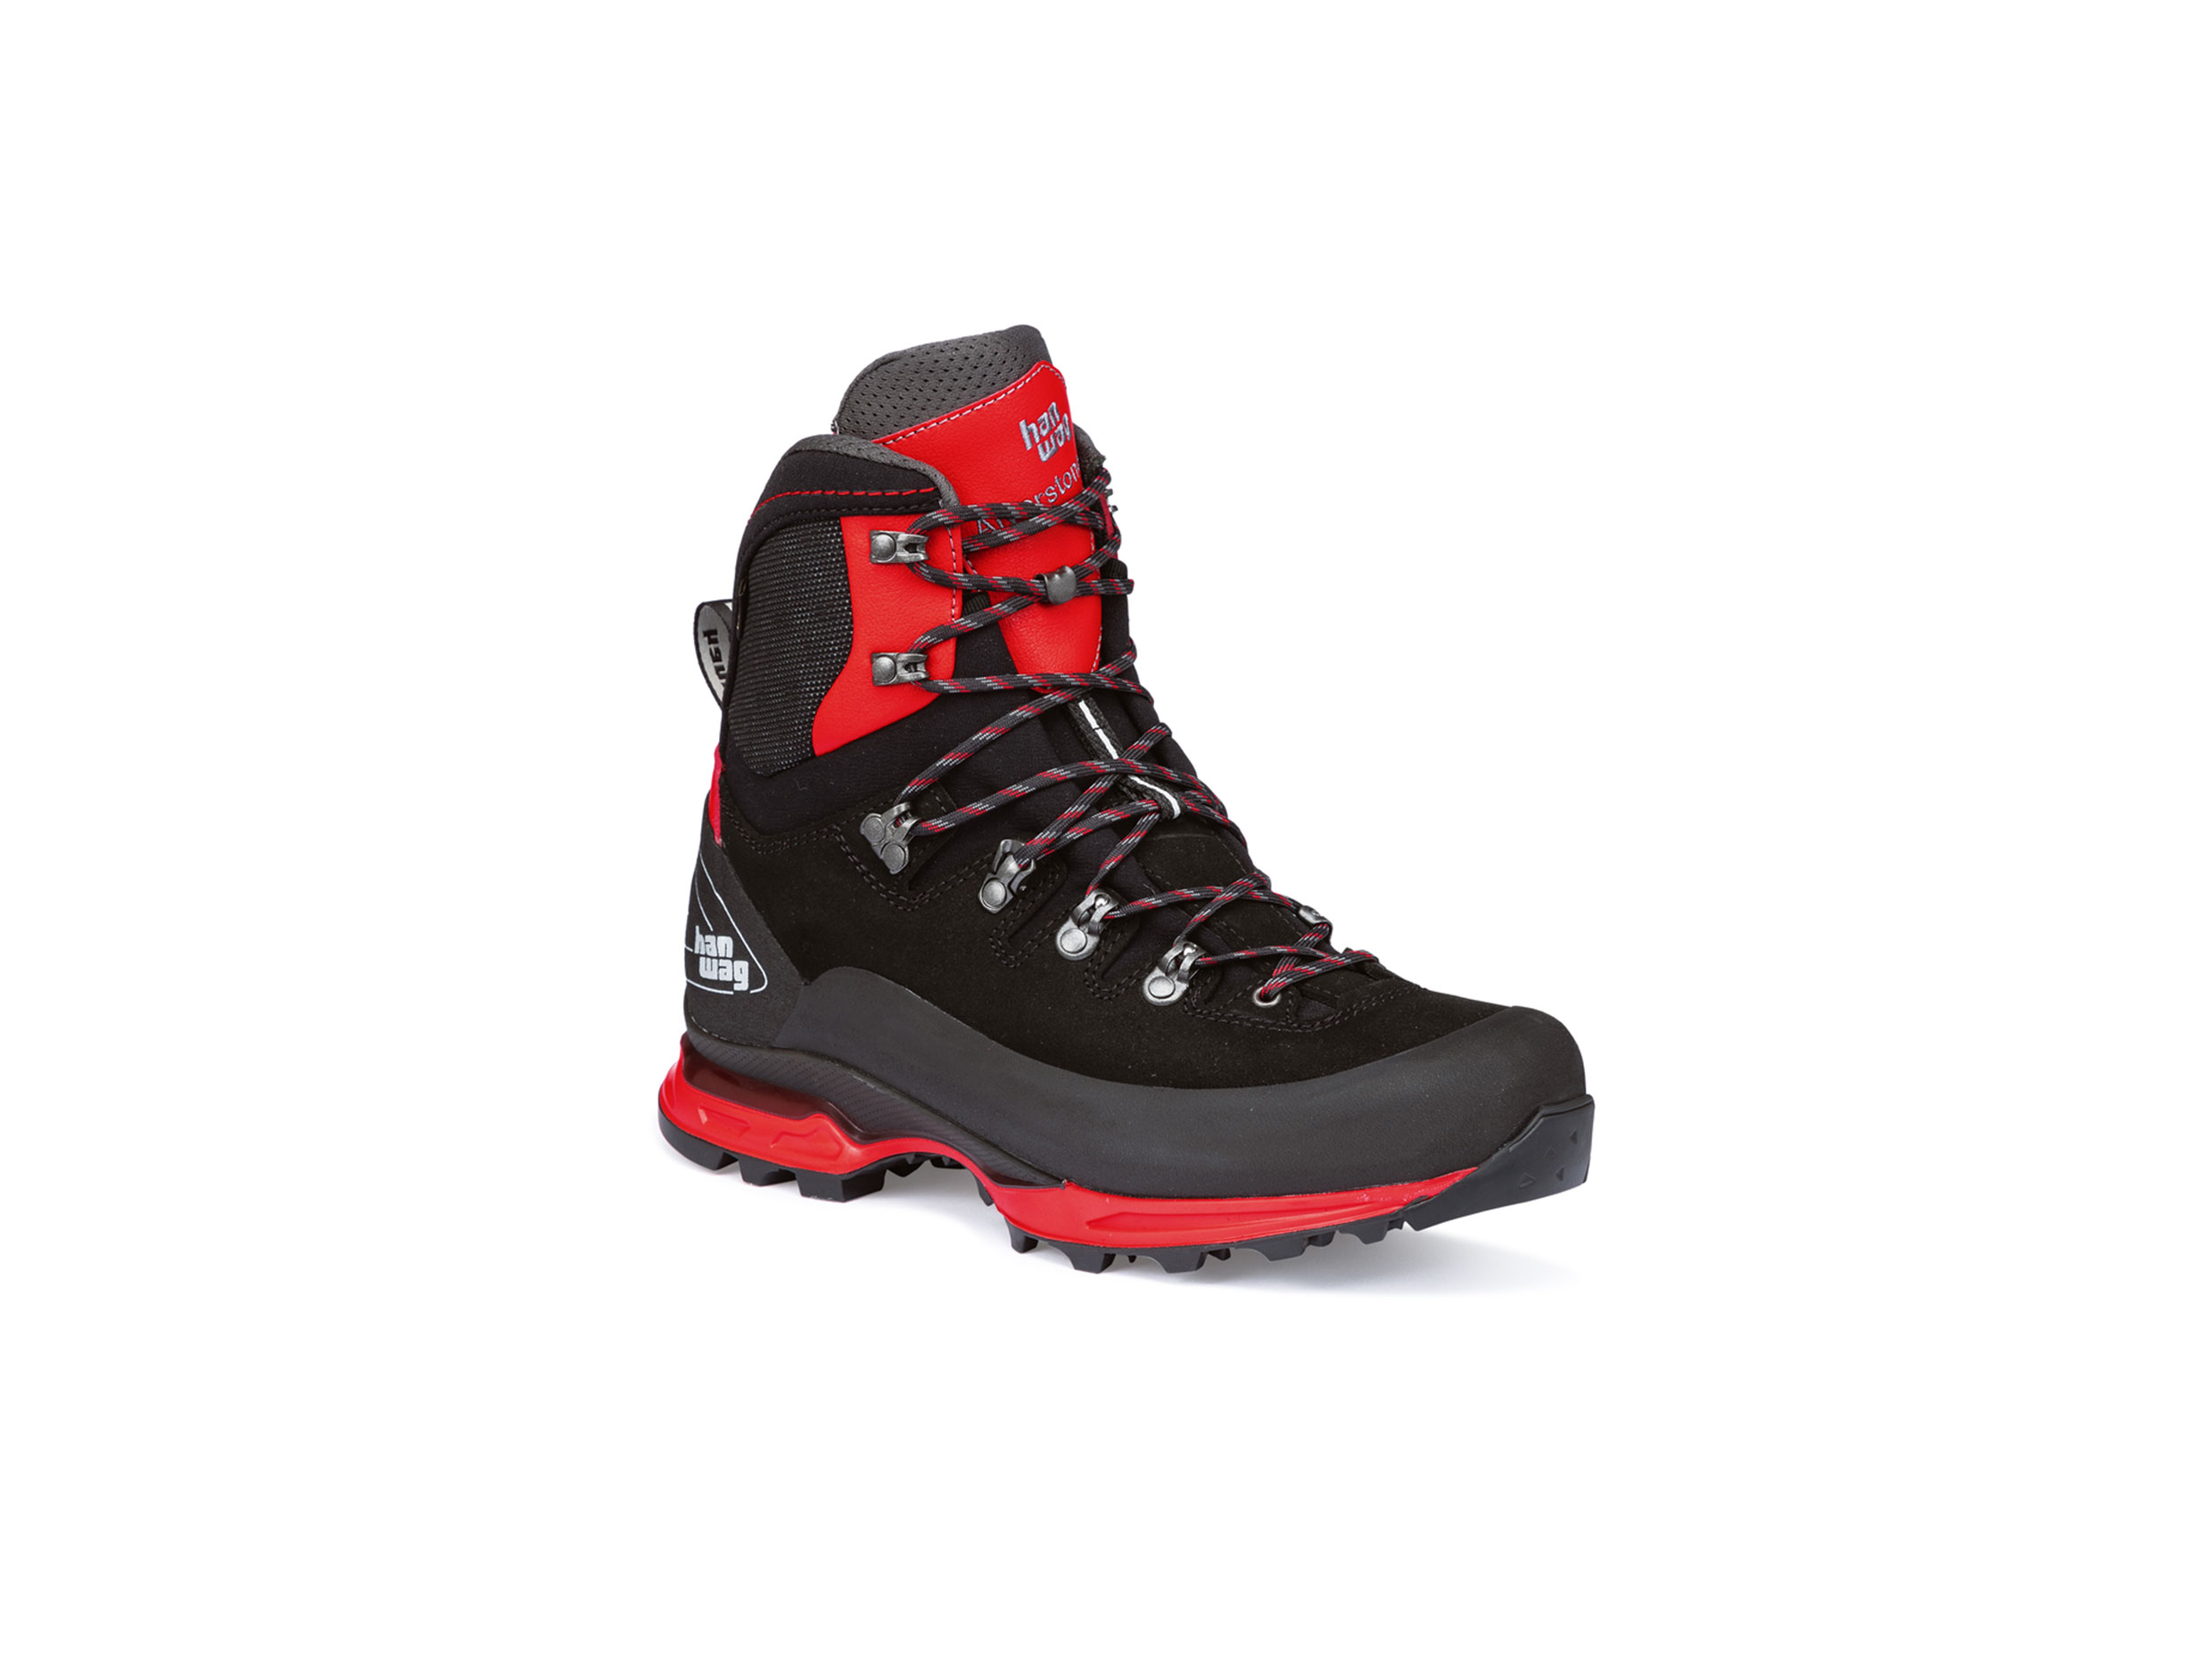 Hiking boots for trekking with dogs Hanwag Alverstone GTX